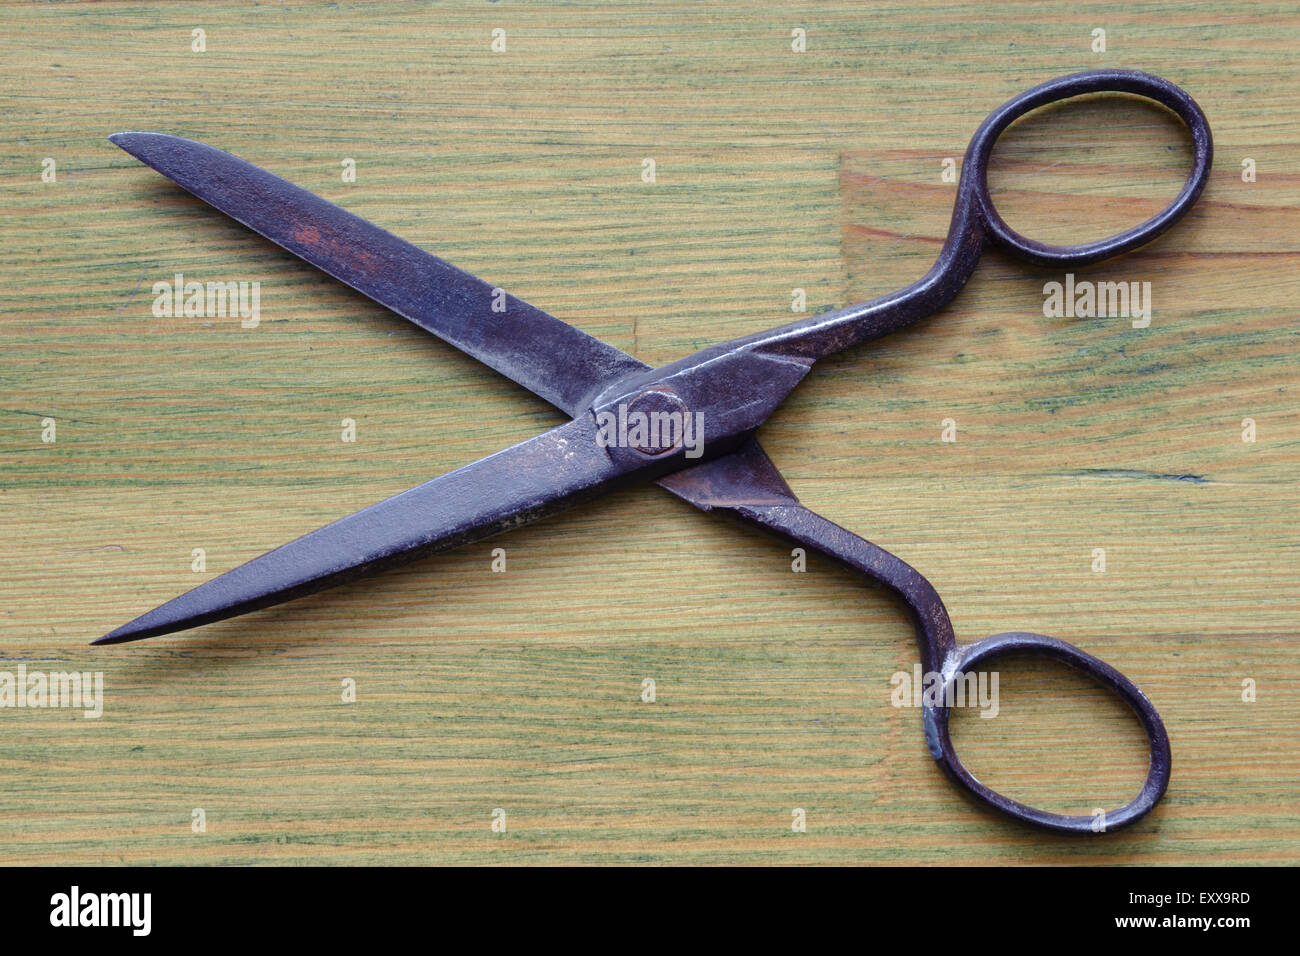 Vintage Metal Cutting Scissors On Wooden Stock Photo